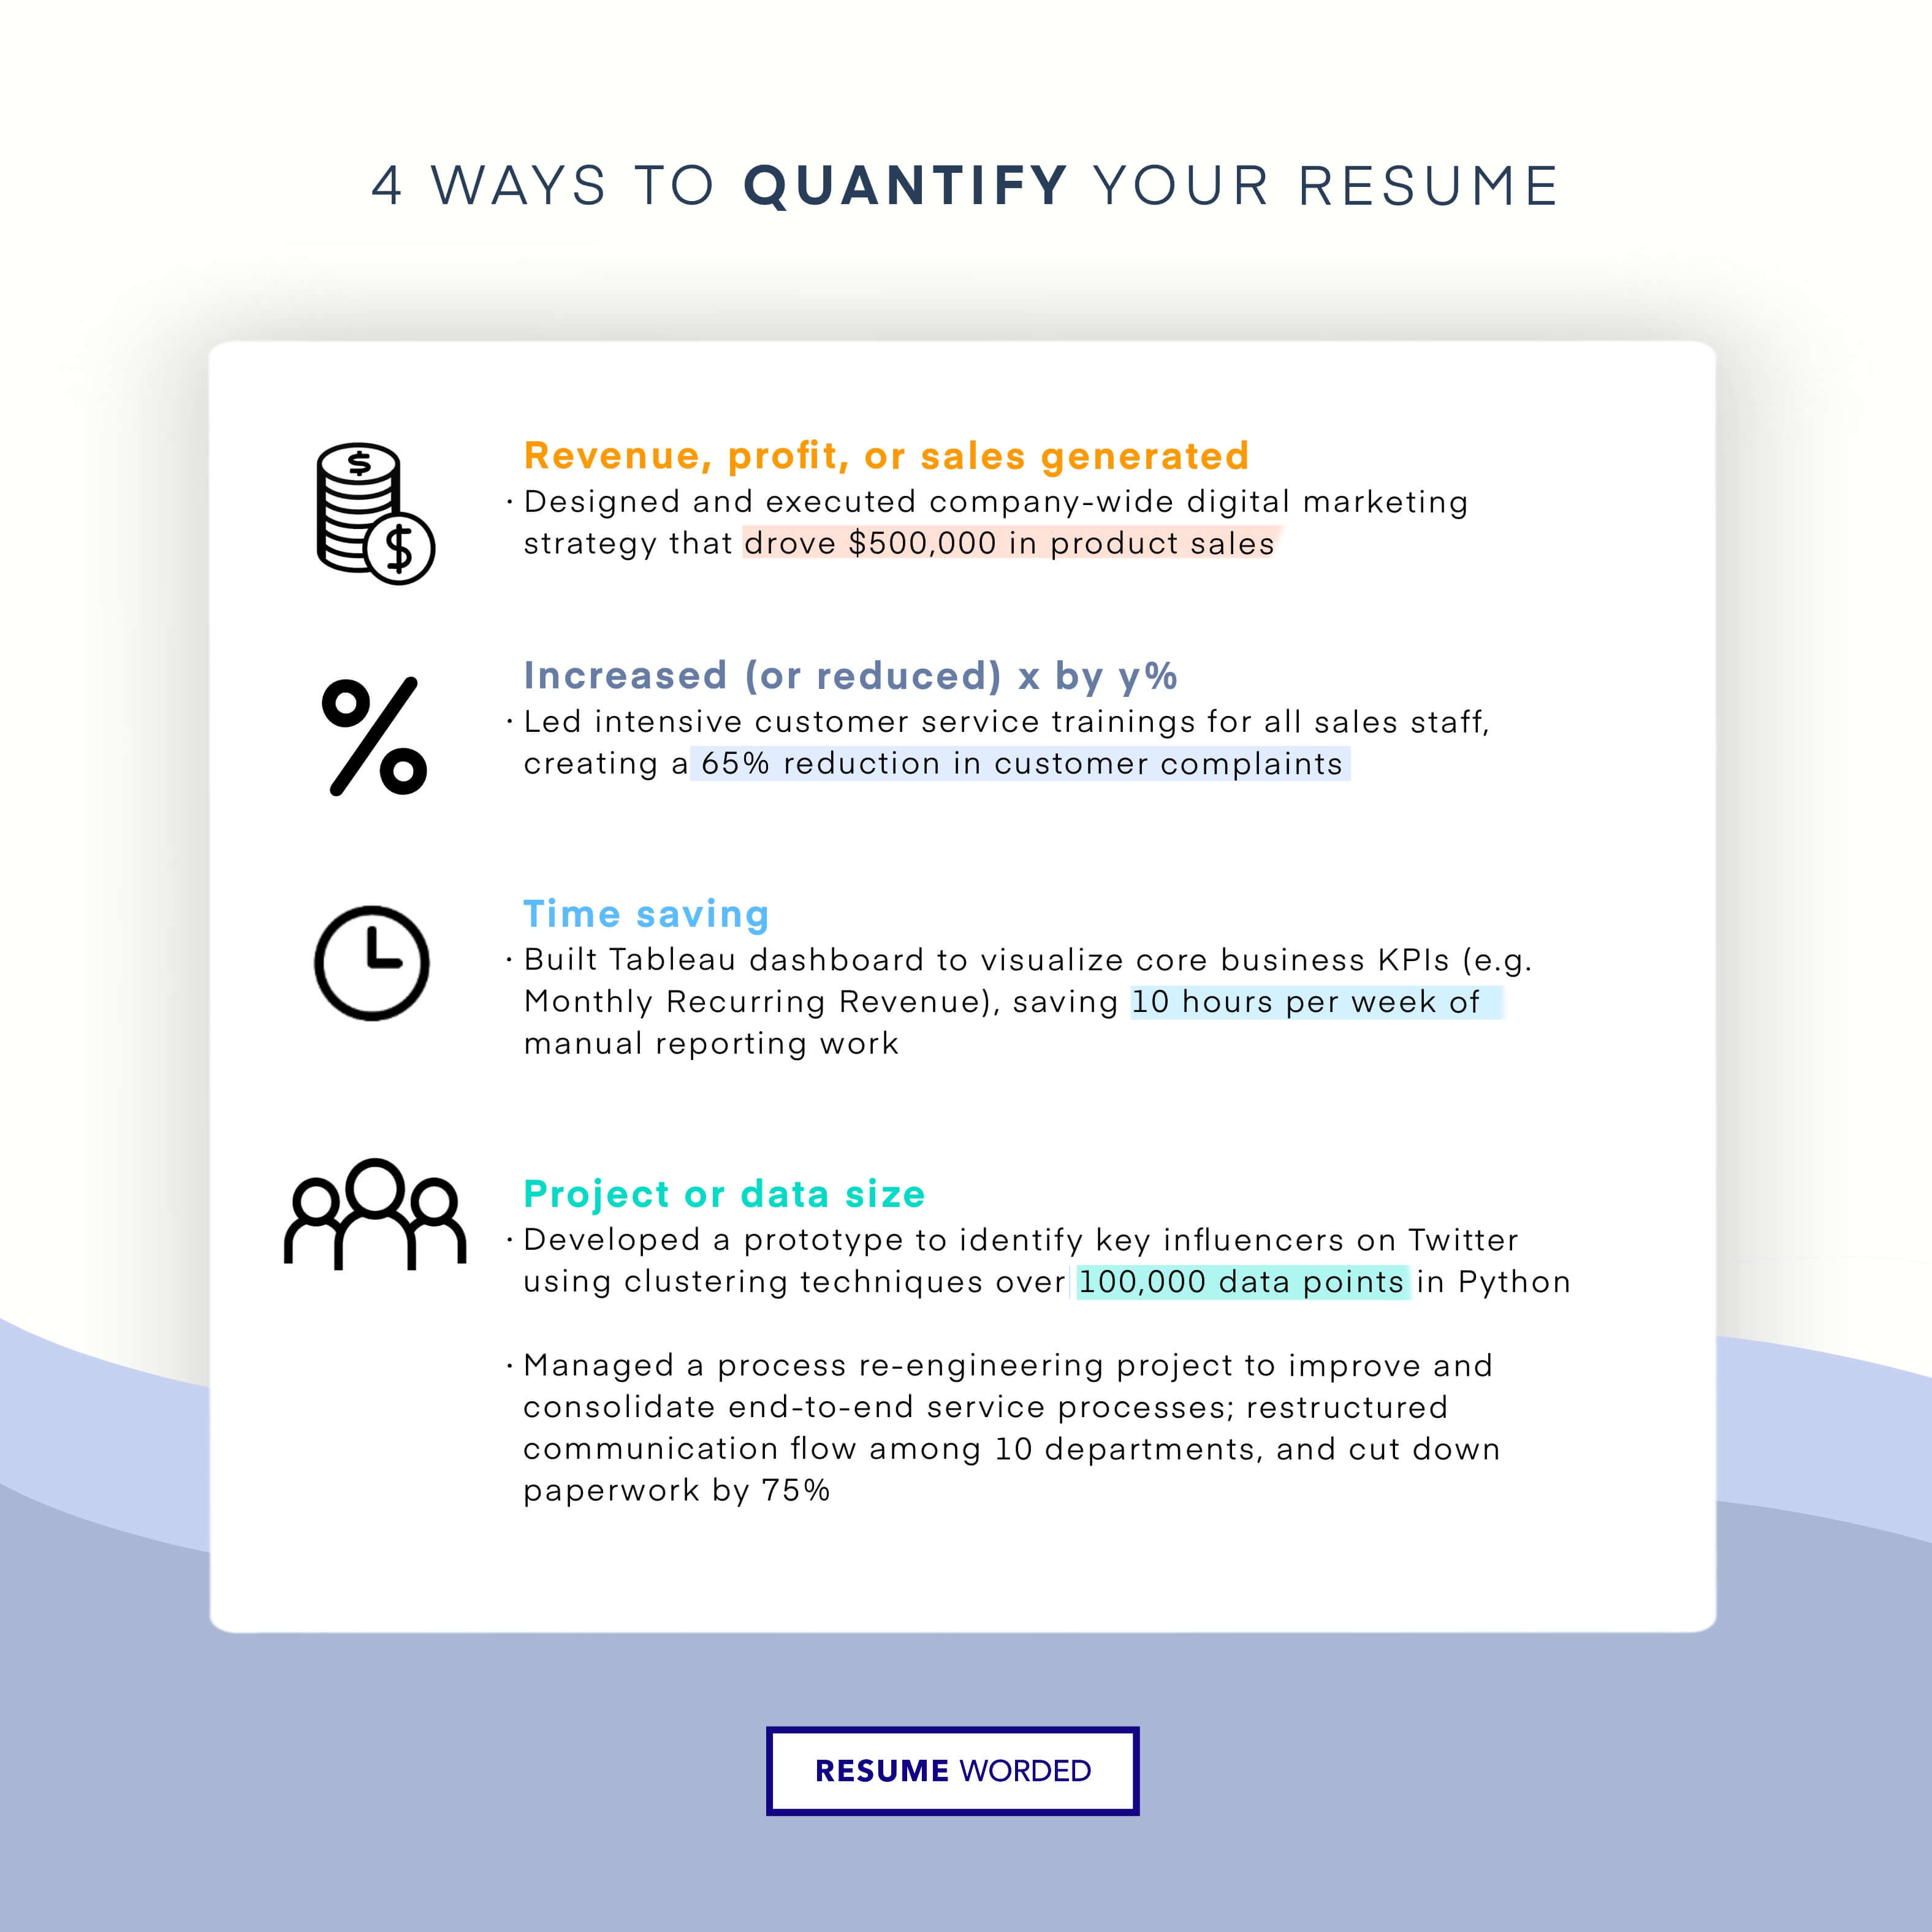 Quantify your interview numbers. - Staff Auditor Resume